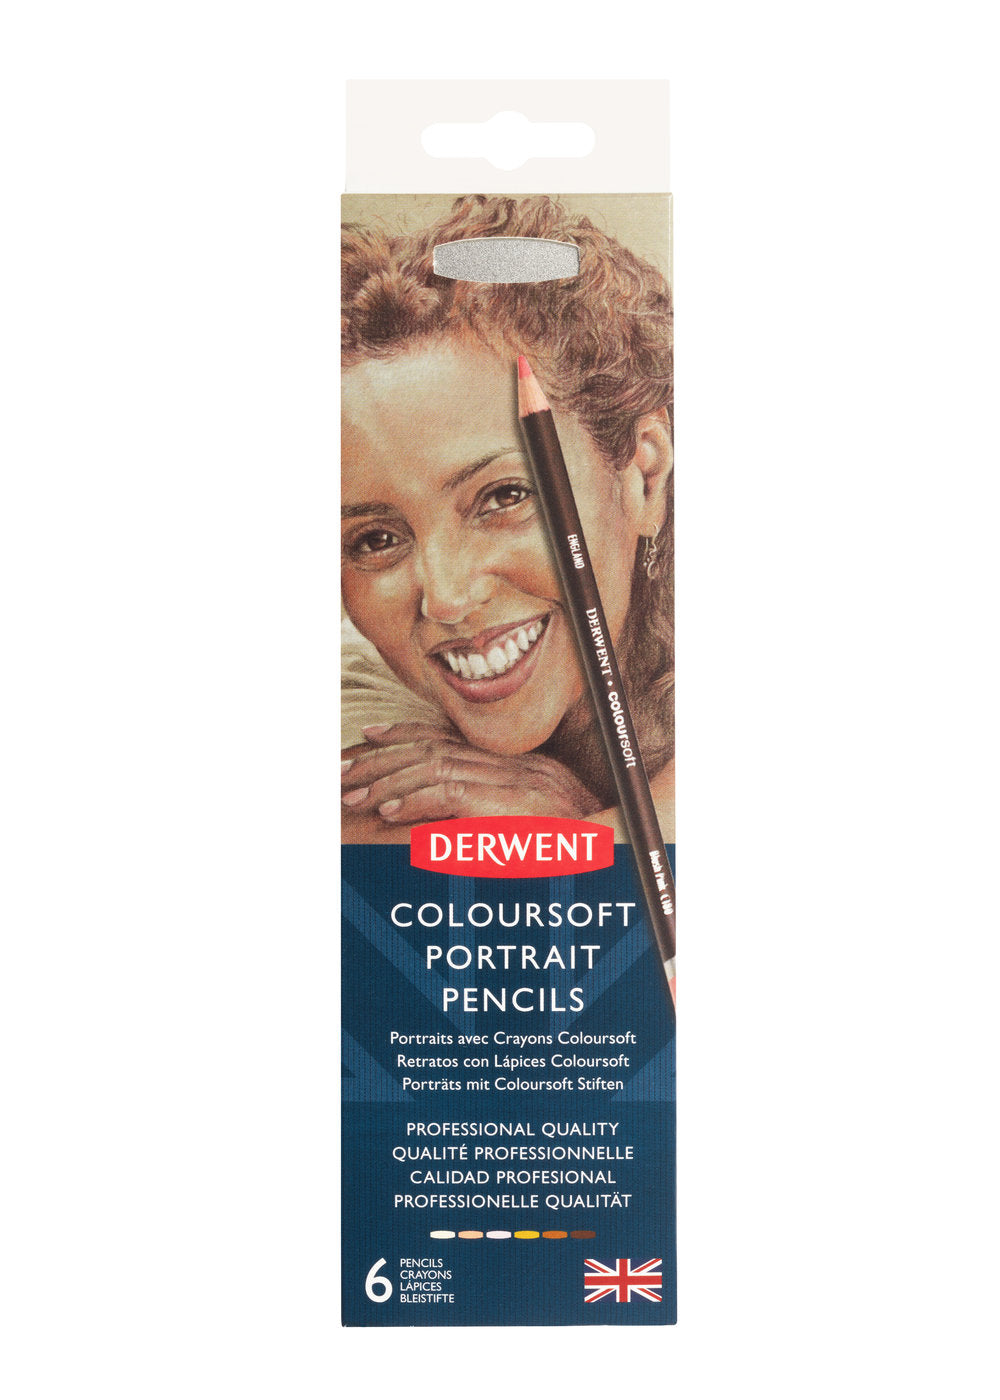 Derwent Coloursoft drawing pencils Skintones Tin 6 pencils & sharpener. The pencils have a soft, velvety strip, ideal for the quick application of bold colour. Contains 6 specially selected colours to create a variety of life-like skin tones: Cream, Blush Pink, Pink, Ochre, Dark Terracotta and Brown Earth.